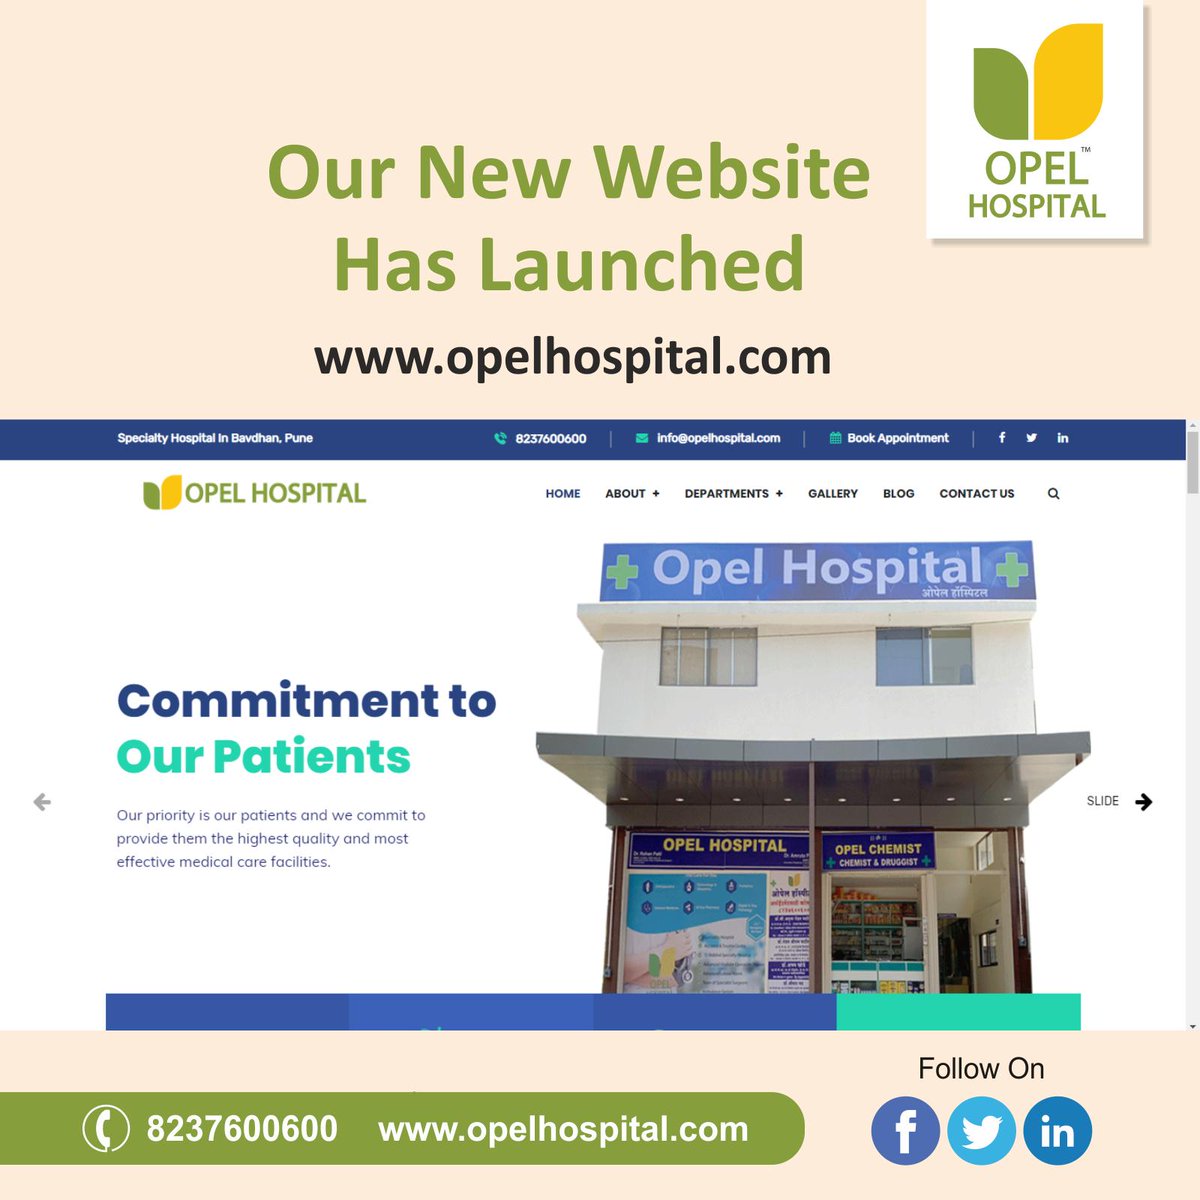 We're happy to announce the launch of our brand new website. Be sure to check it out at opelhospital.com

#OpelHospital #HospitalinBavdhan #SpecialtyHospital #Orhopedics #Cardiac #obstetrics #Gynecology